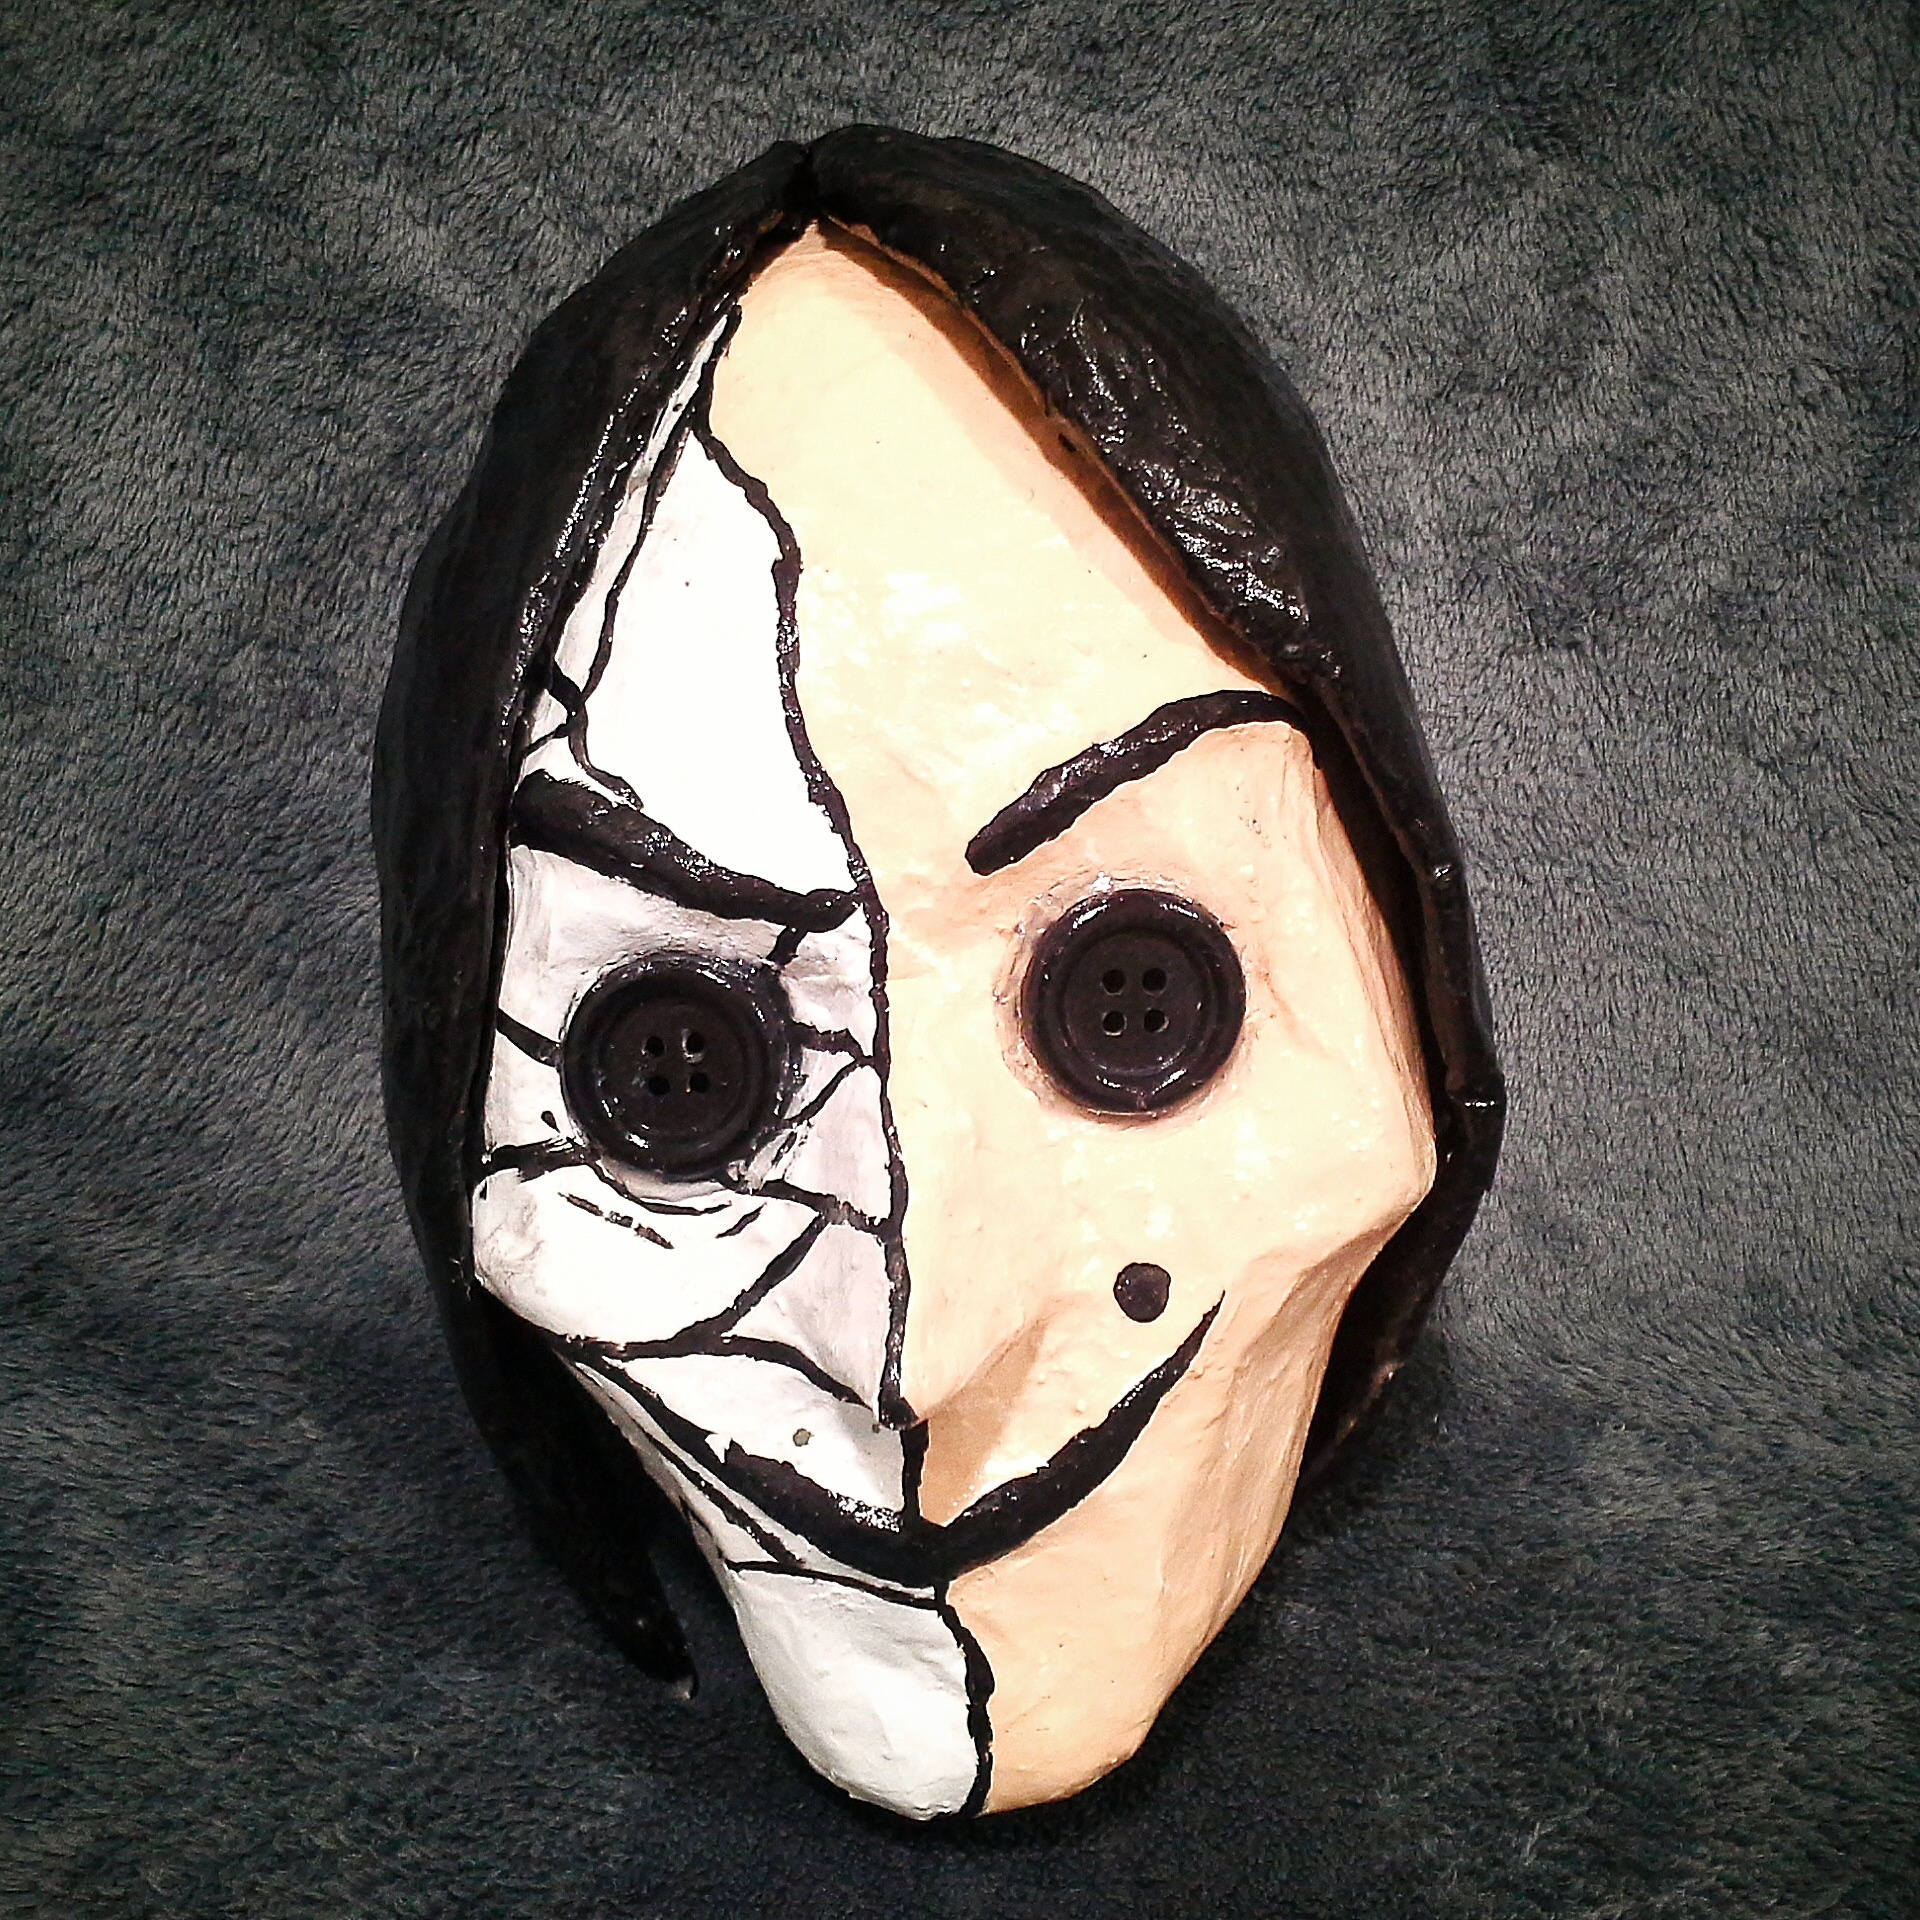 How To Make A Paper Mache Mask - The Melrose Family